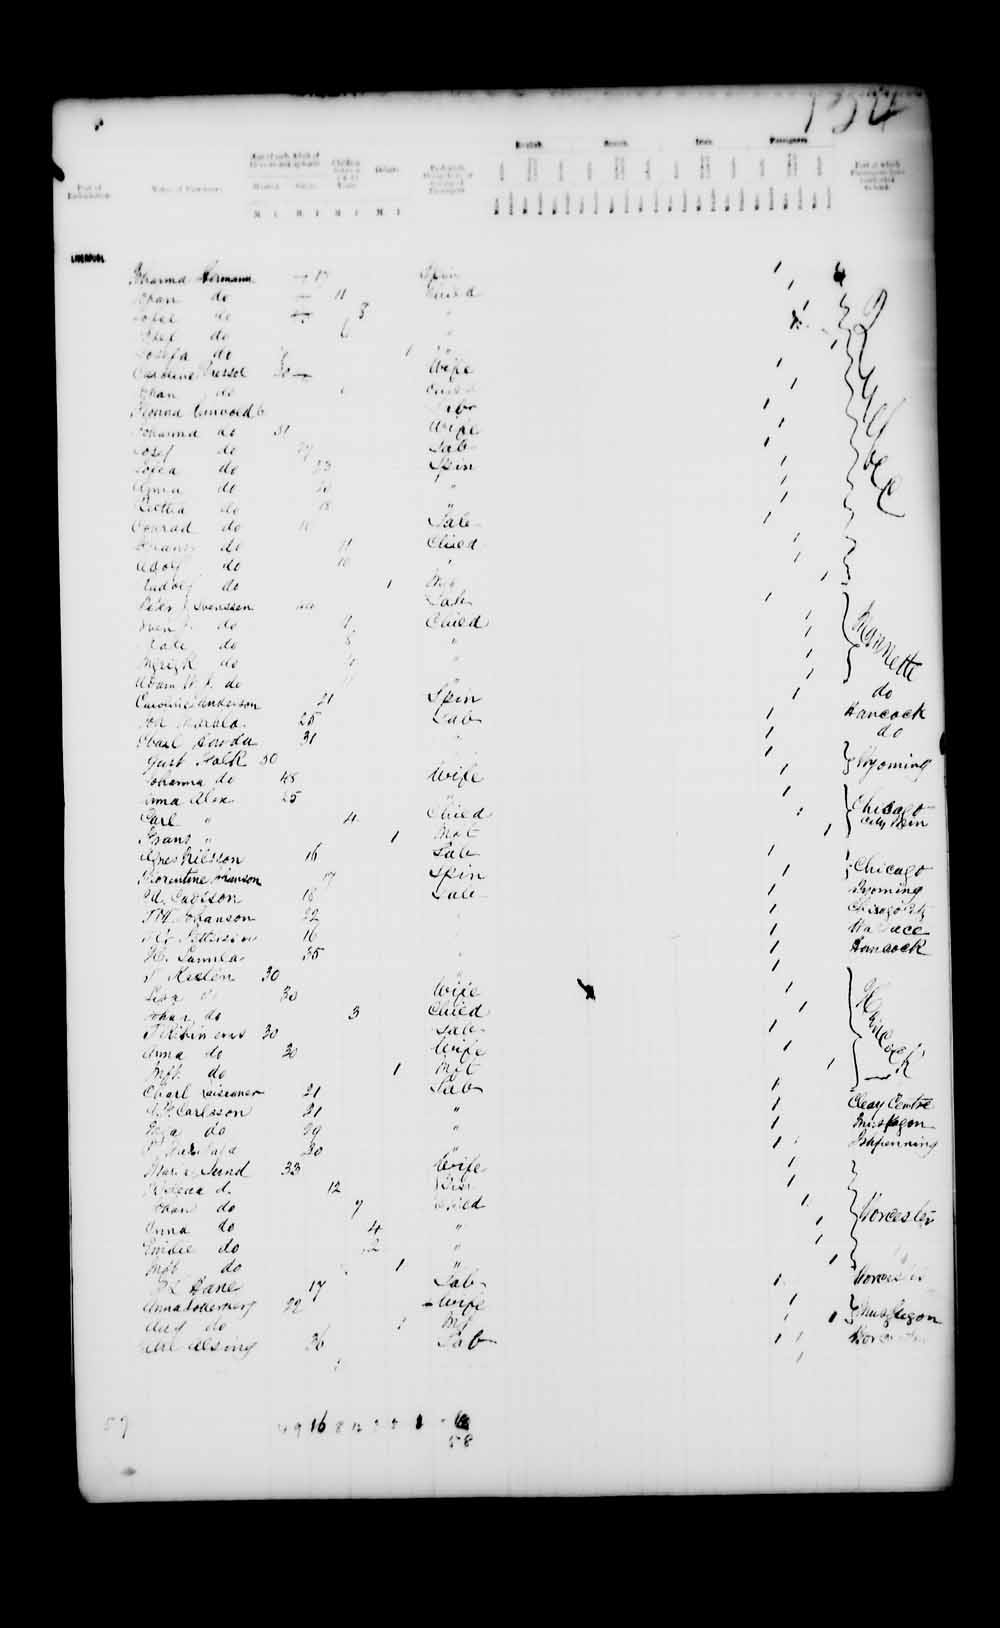 Digitized page of Passenger Lists for Image No.: e003541216